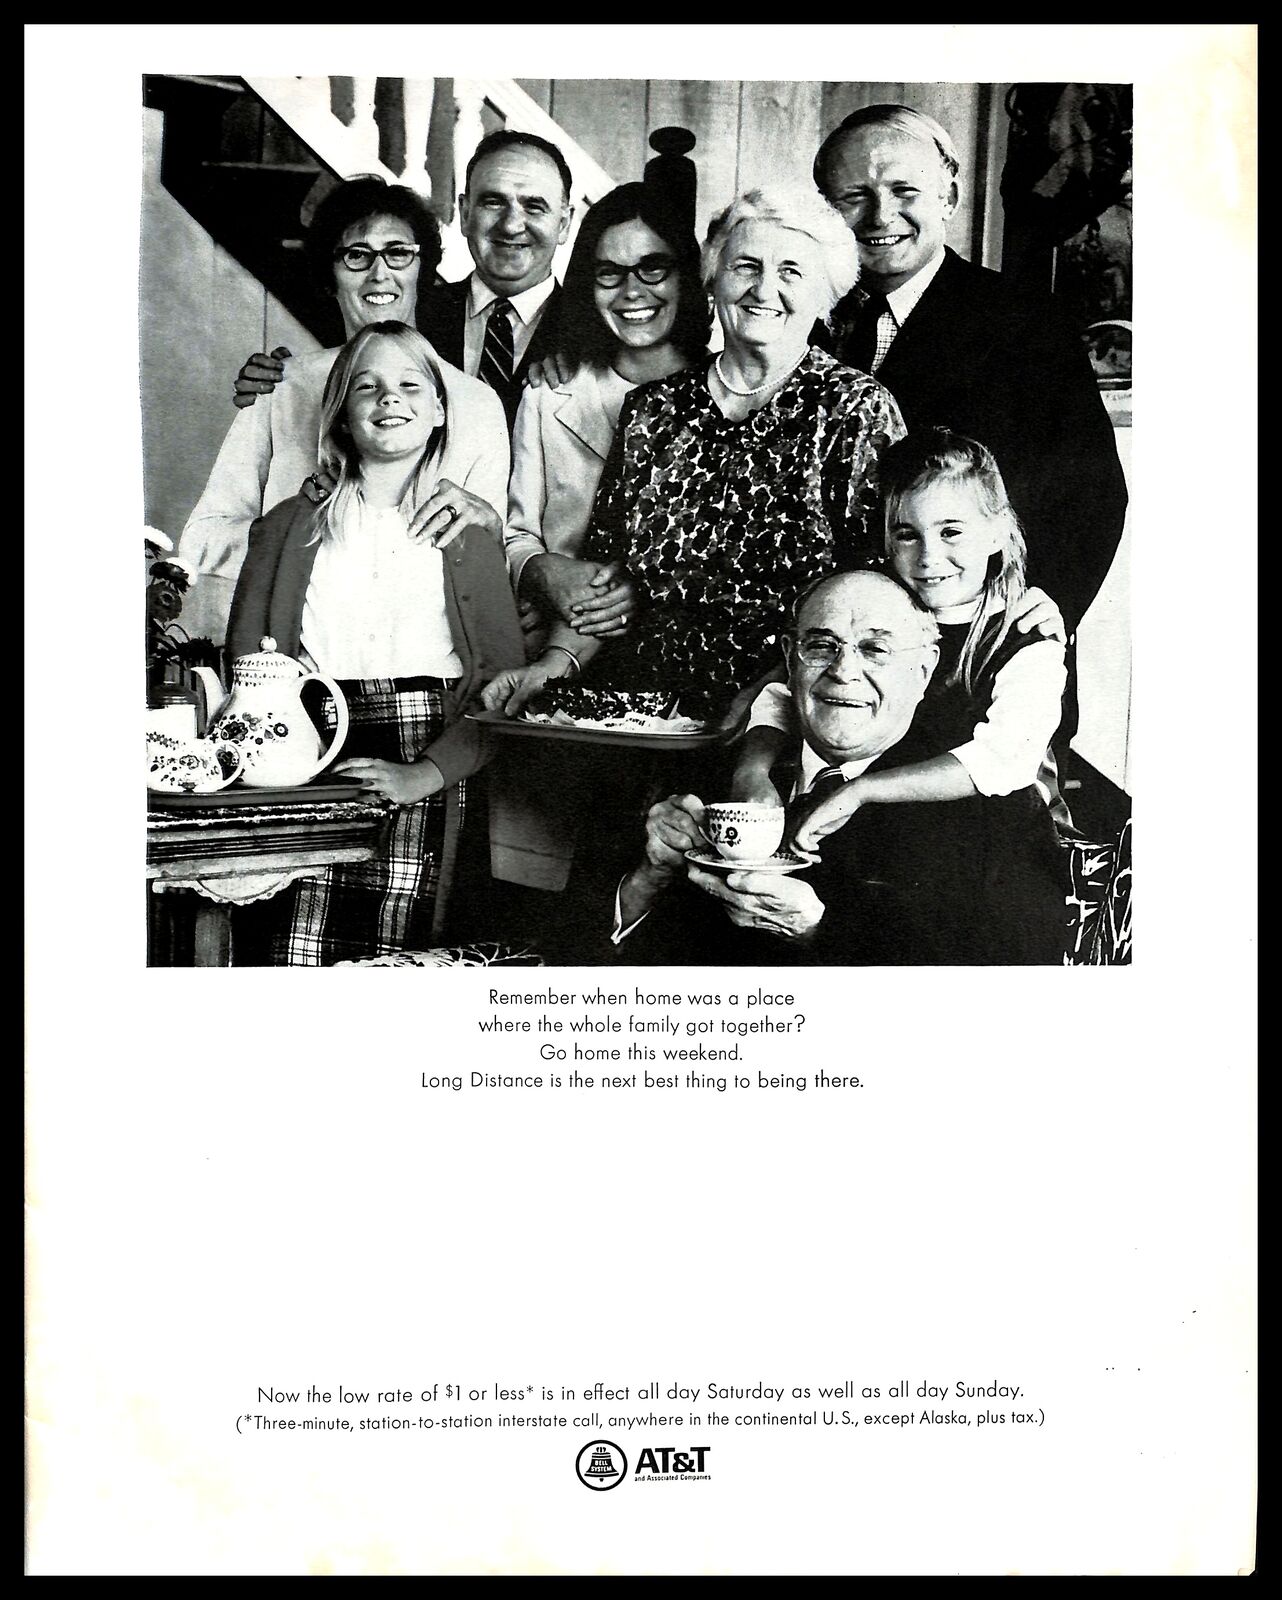 1968 AT&T Long Distance Phone Service Vintage PRINT AD Family Portrait Home Life